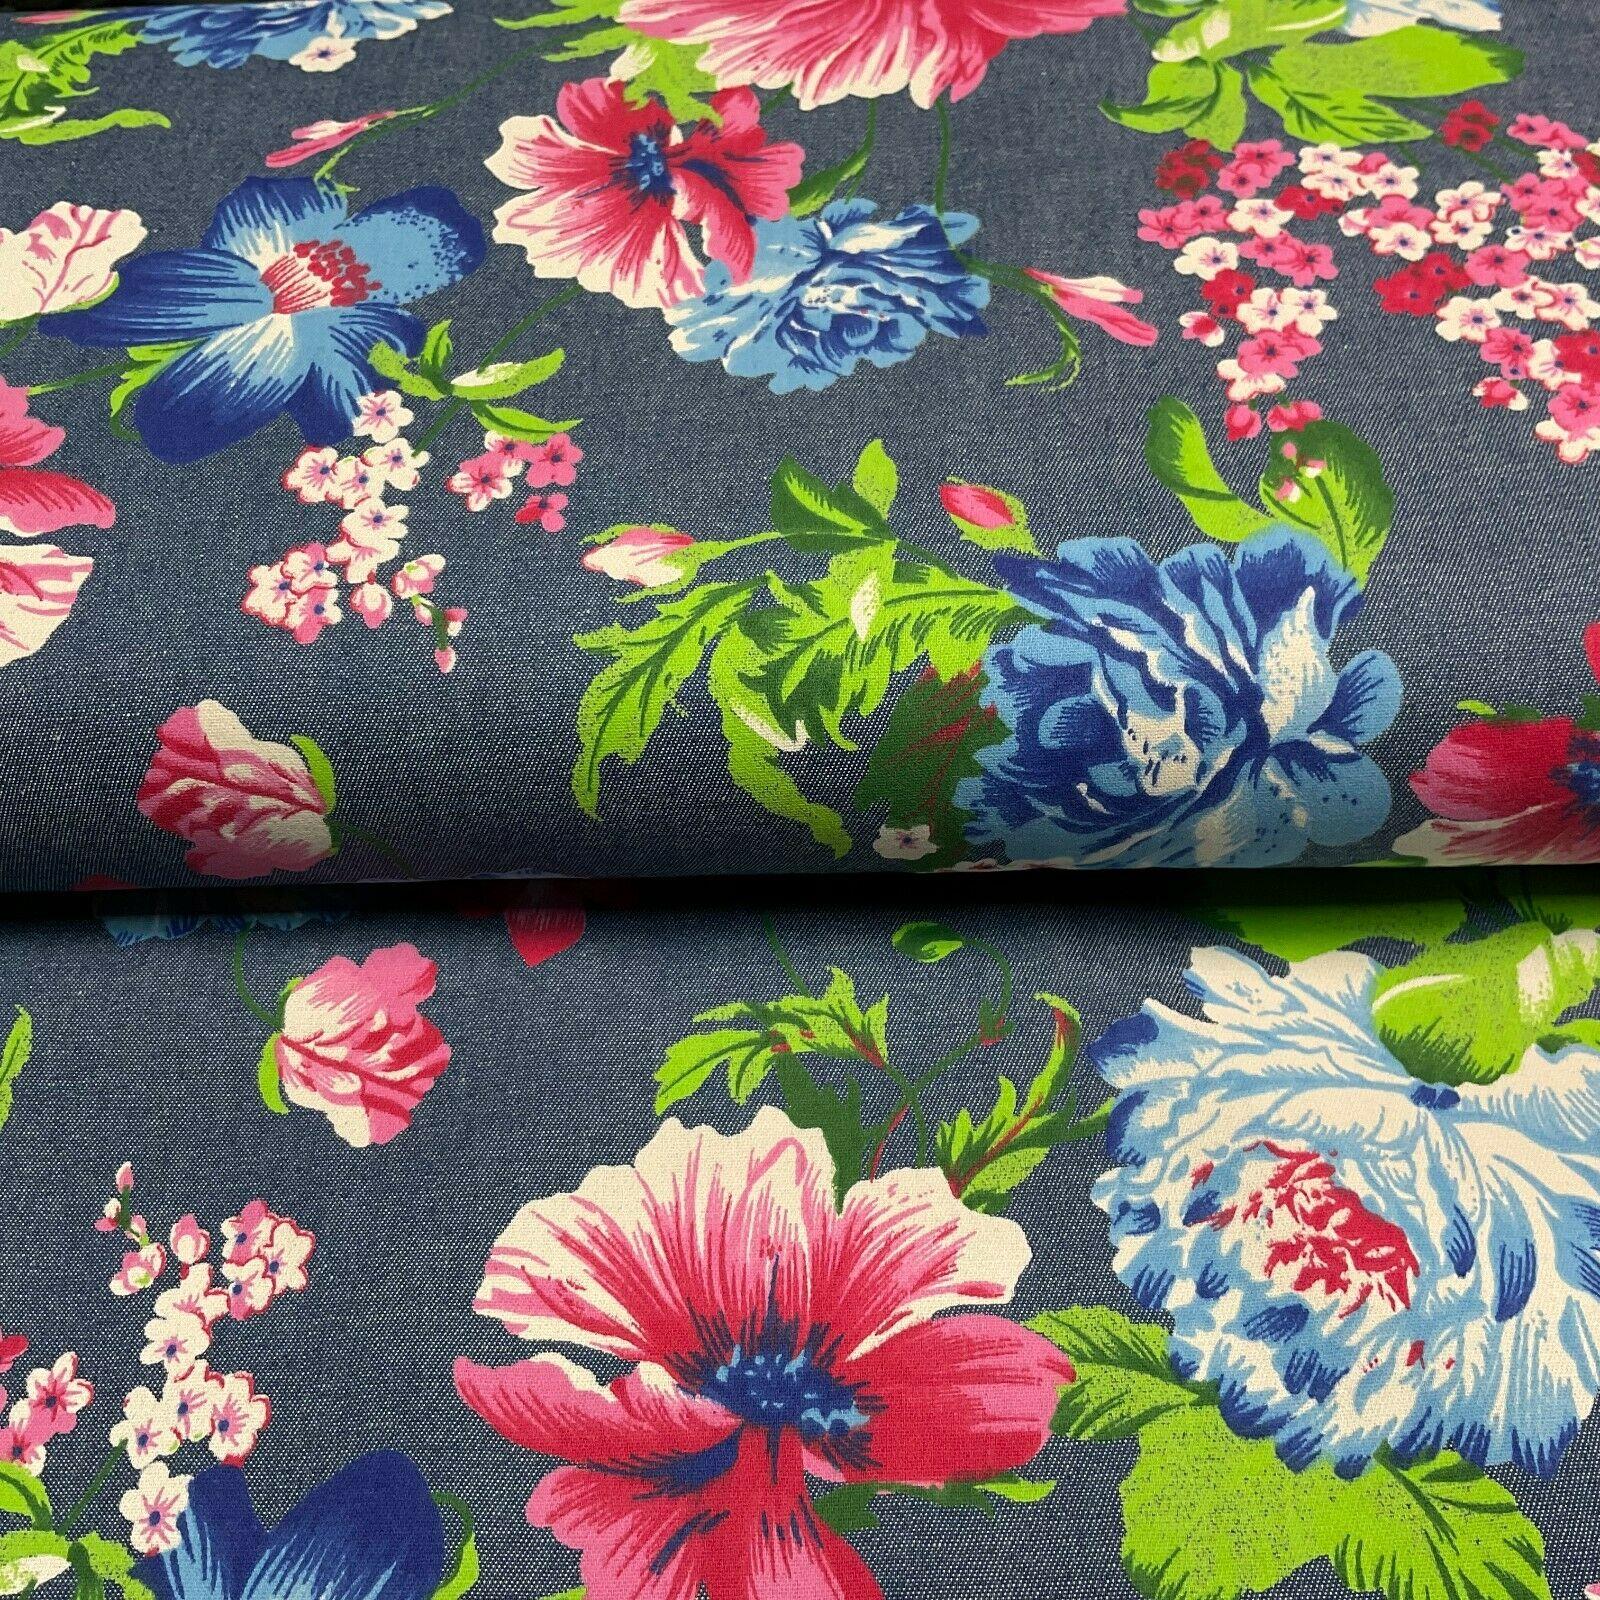 Floral Printed 100% Cotton Chambray Denim Mixed Designs Dress Fabric 147cm M1604